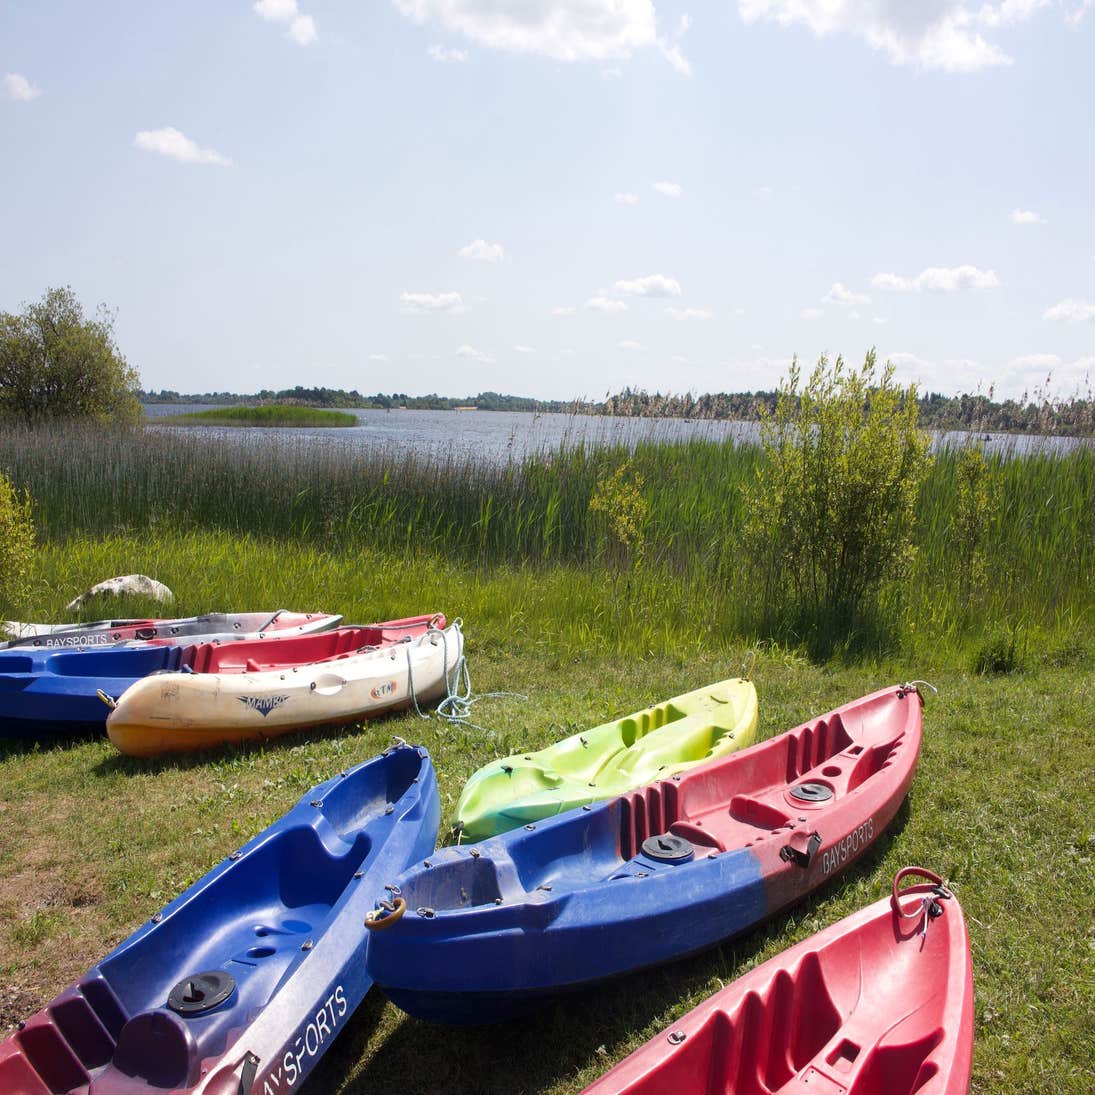 Kayaks resting on the shore of Hodson Bay in Athlone, County Westmeath.